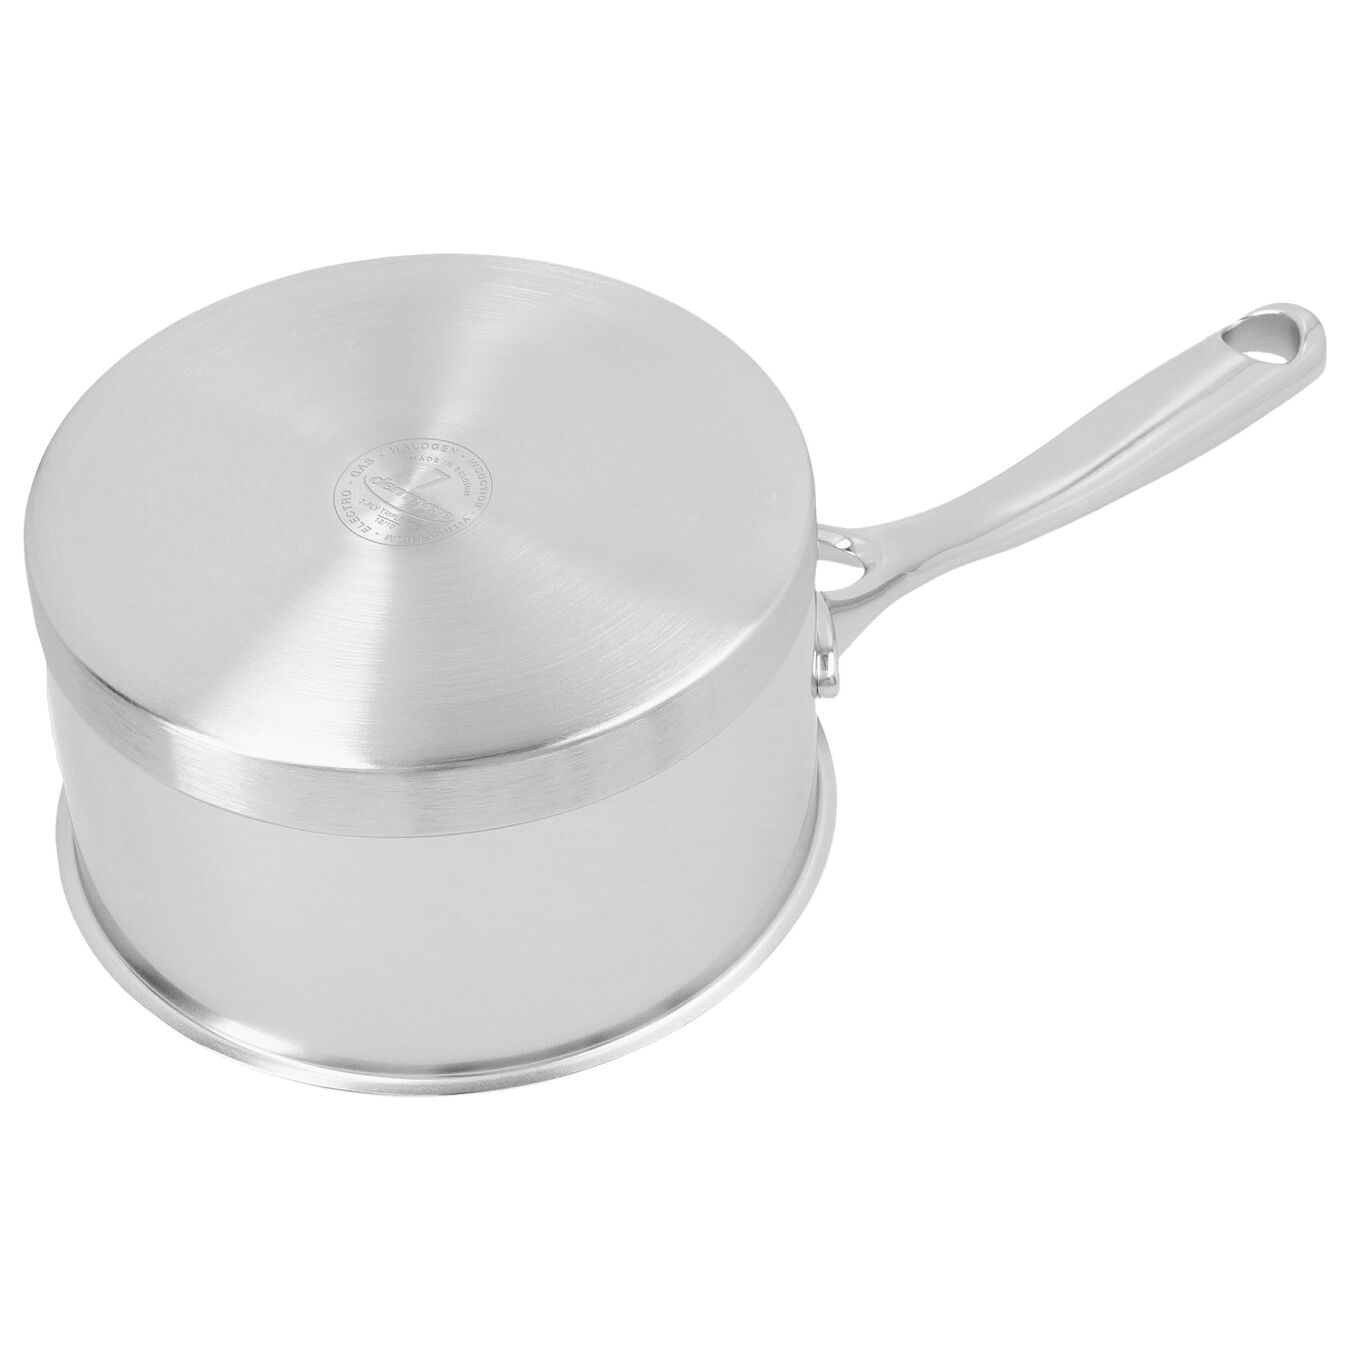 14 cm Stainless steel Saucepan with lid silver,,large 4